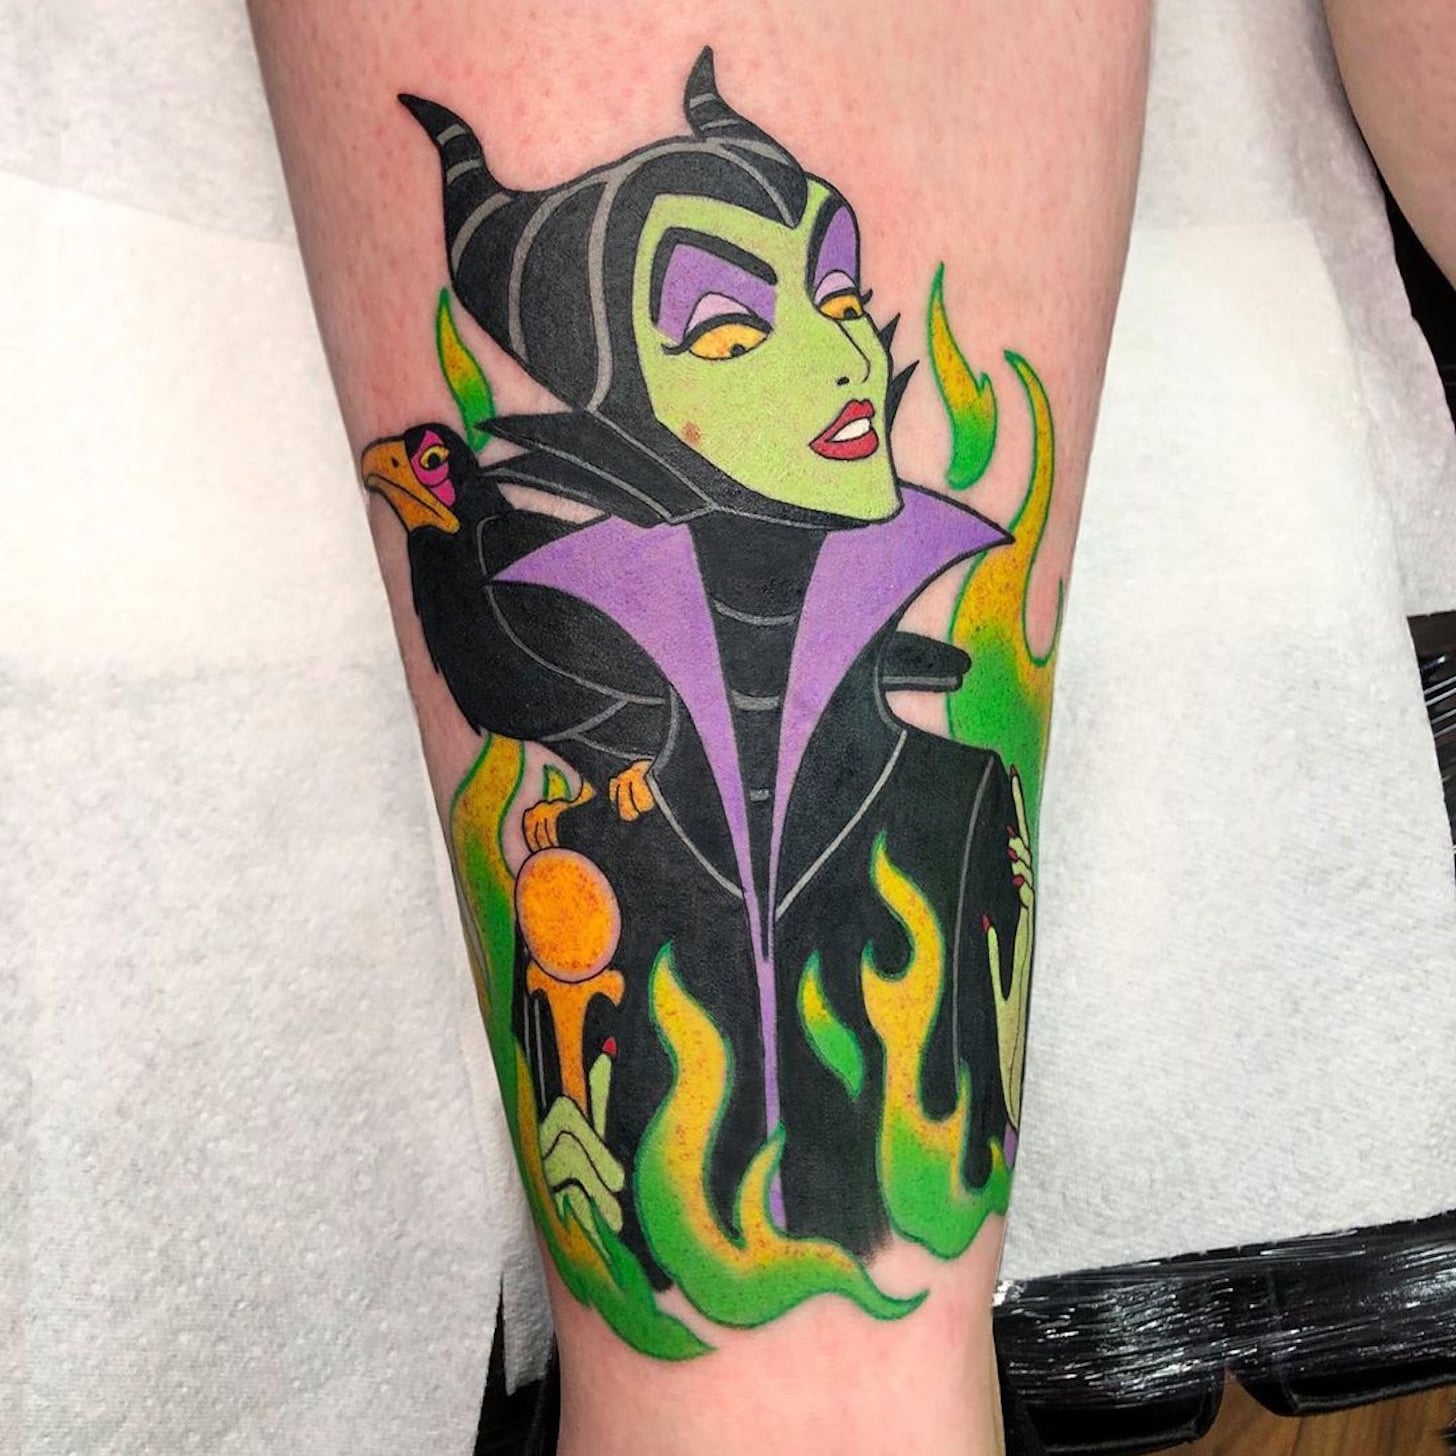 Newest addition to the Disney Villains themed sleeve Scar from Lion King  done by Kendal Harkey  Golden Lotus Tattoo Studio in Sherwood Ar  r tattoos